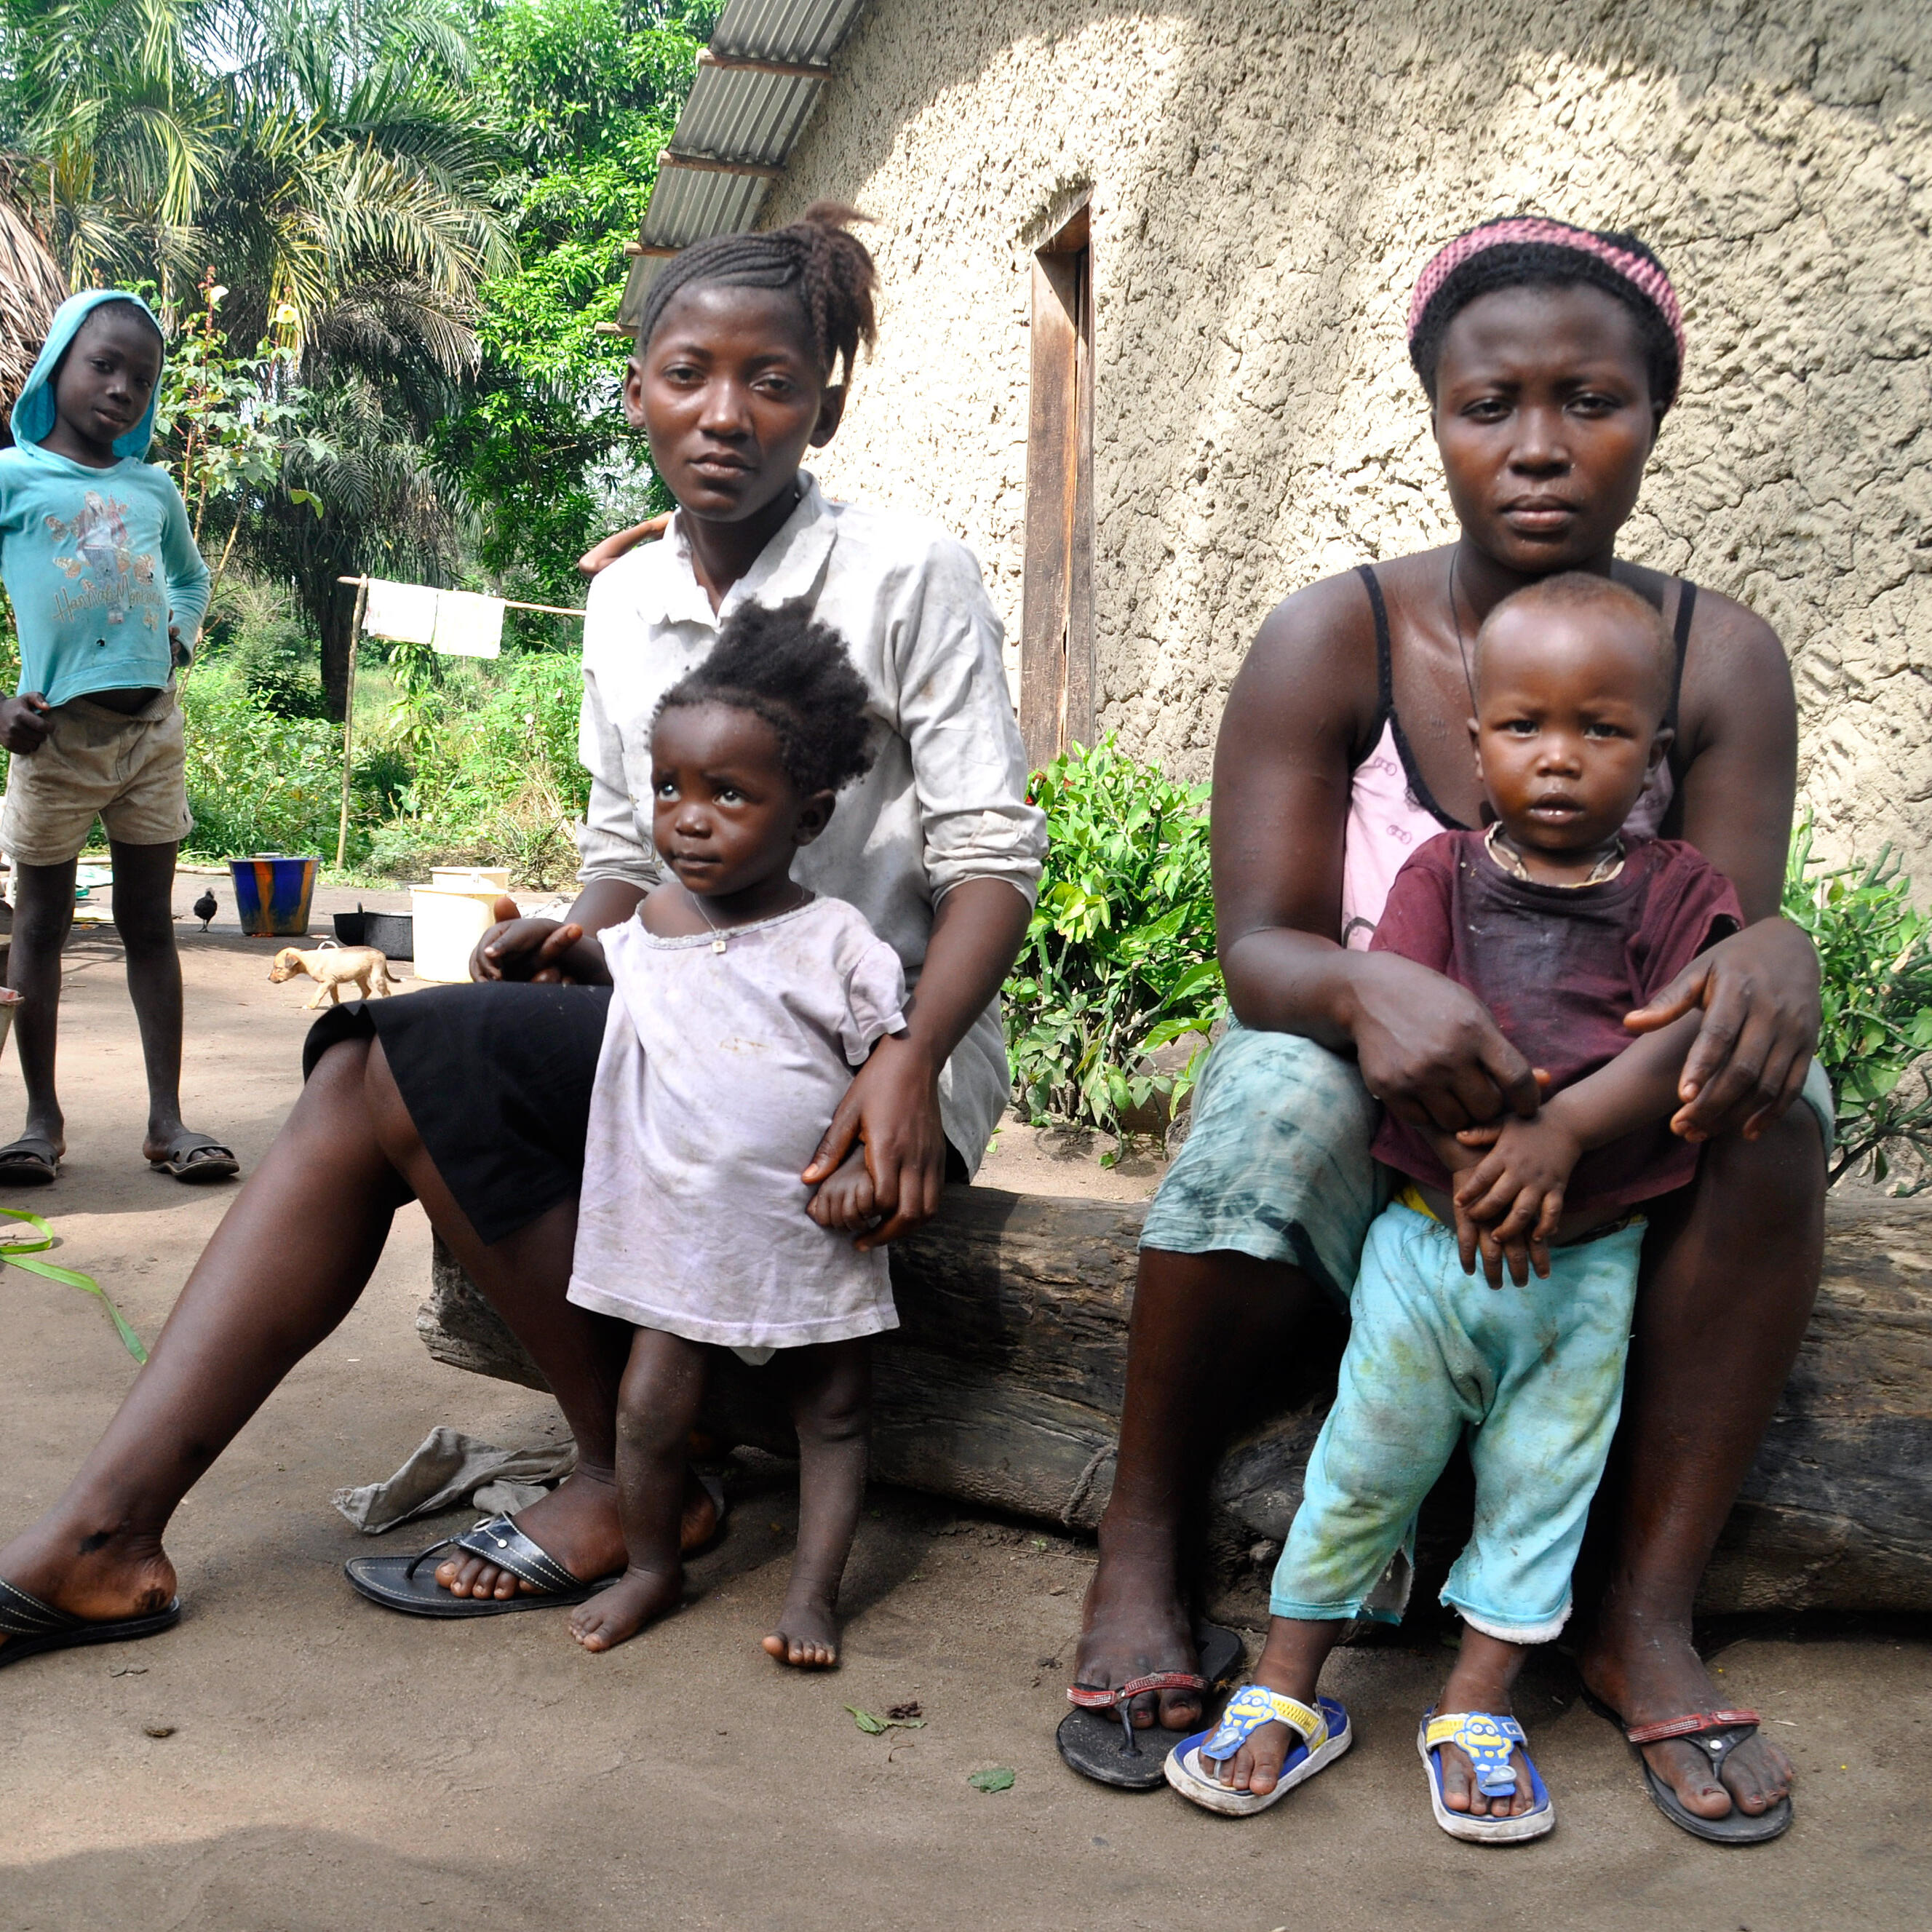 Two women sit on a bench and hold their young children, while a man and a girl stand in the background.